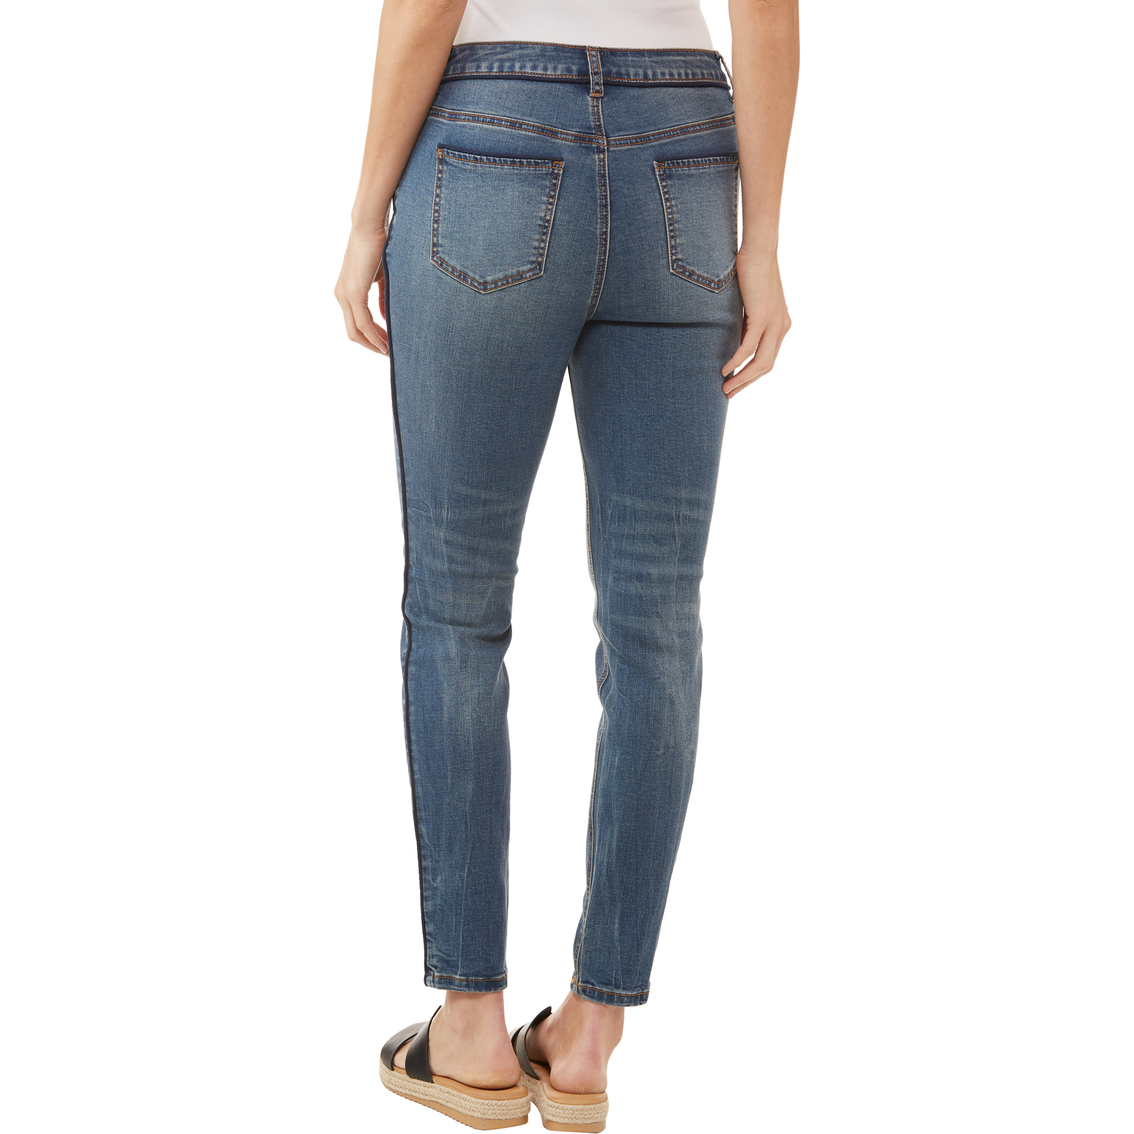 Passports Piping Skinny Jeans | Jeans | Clothing & Accessories | Shop ...